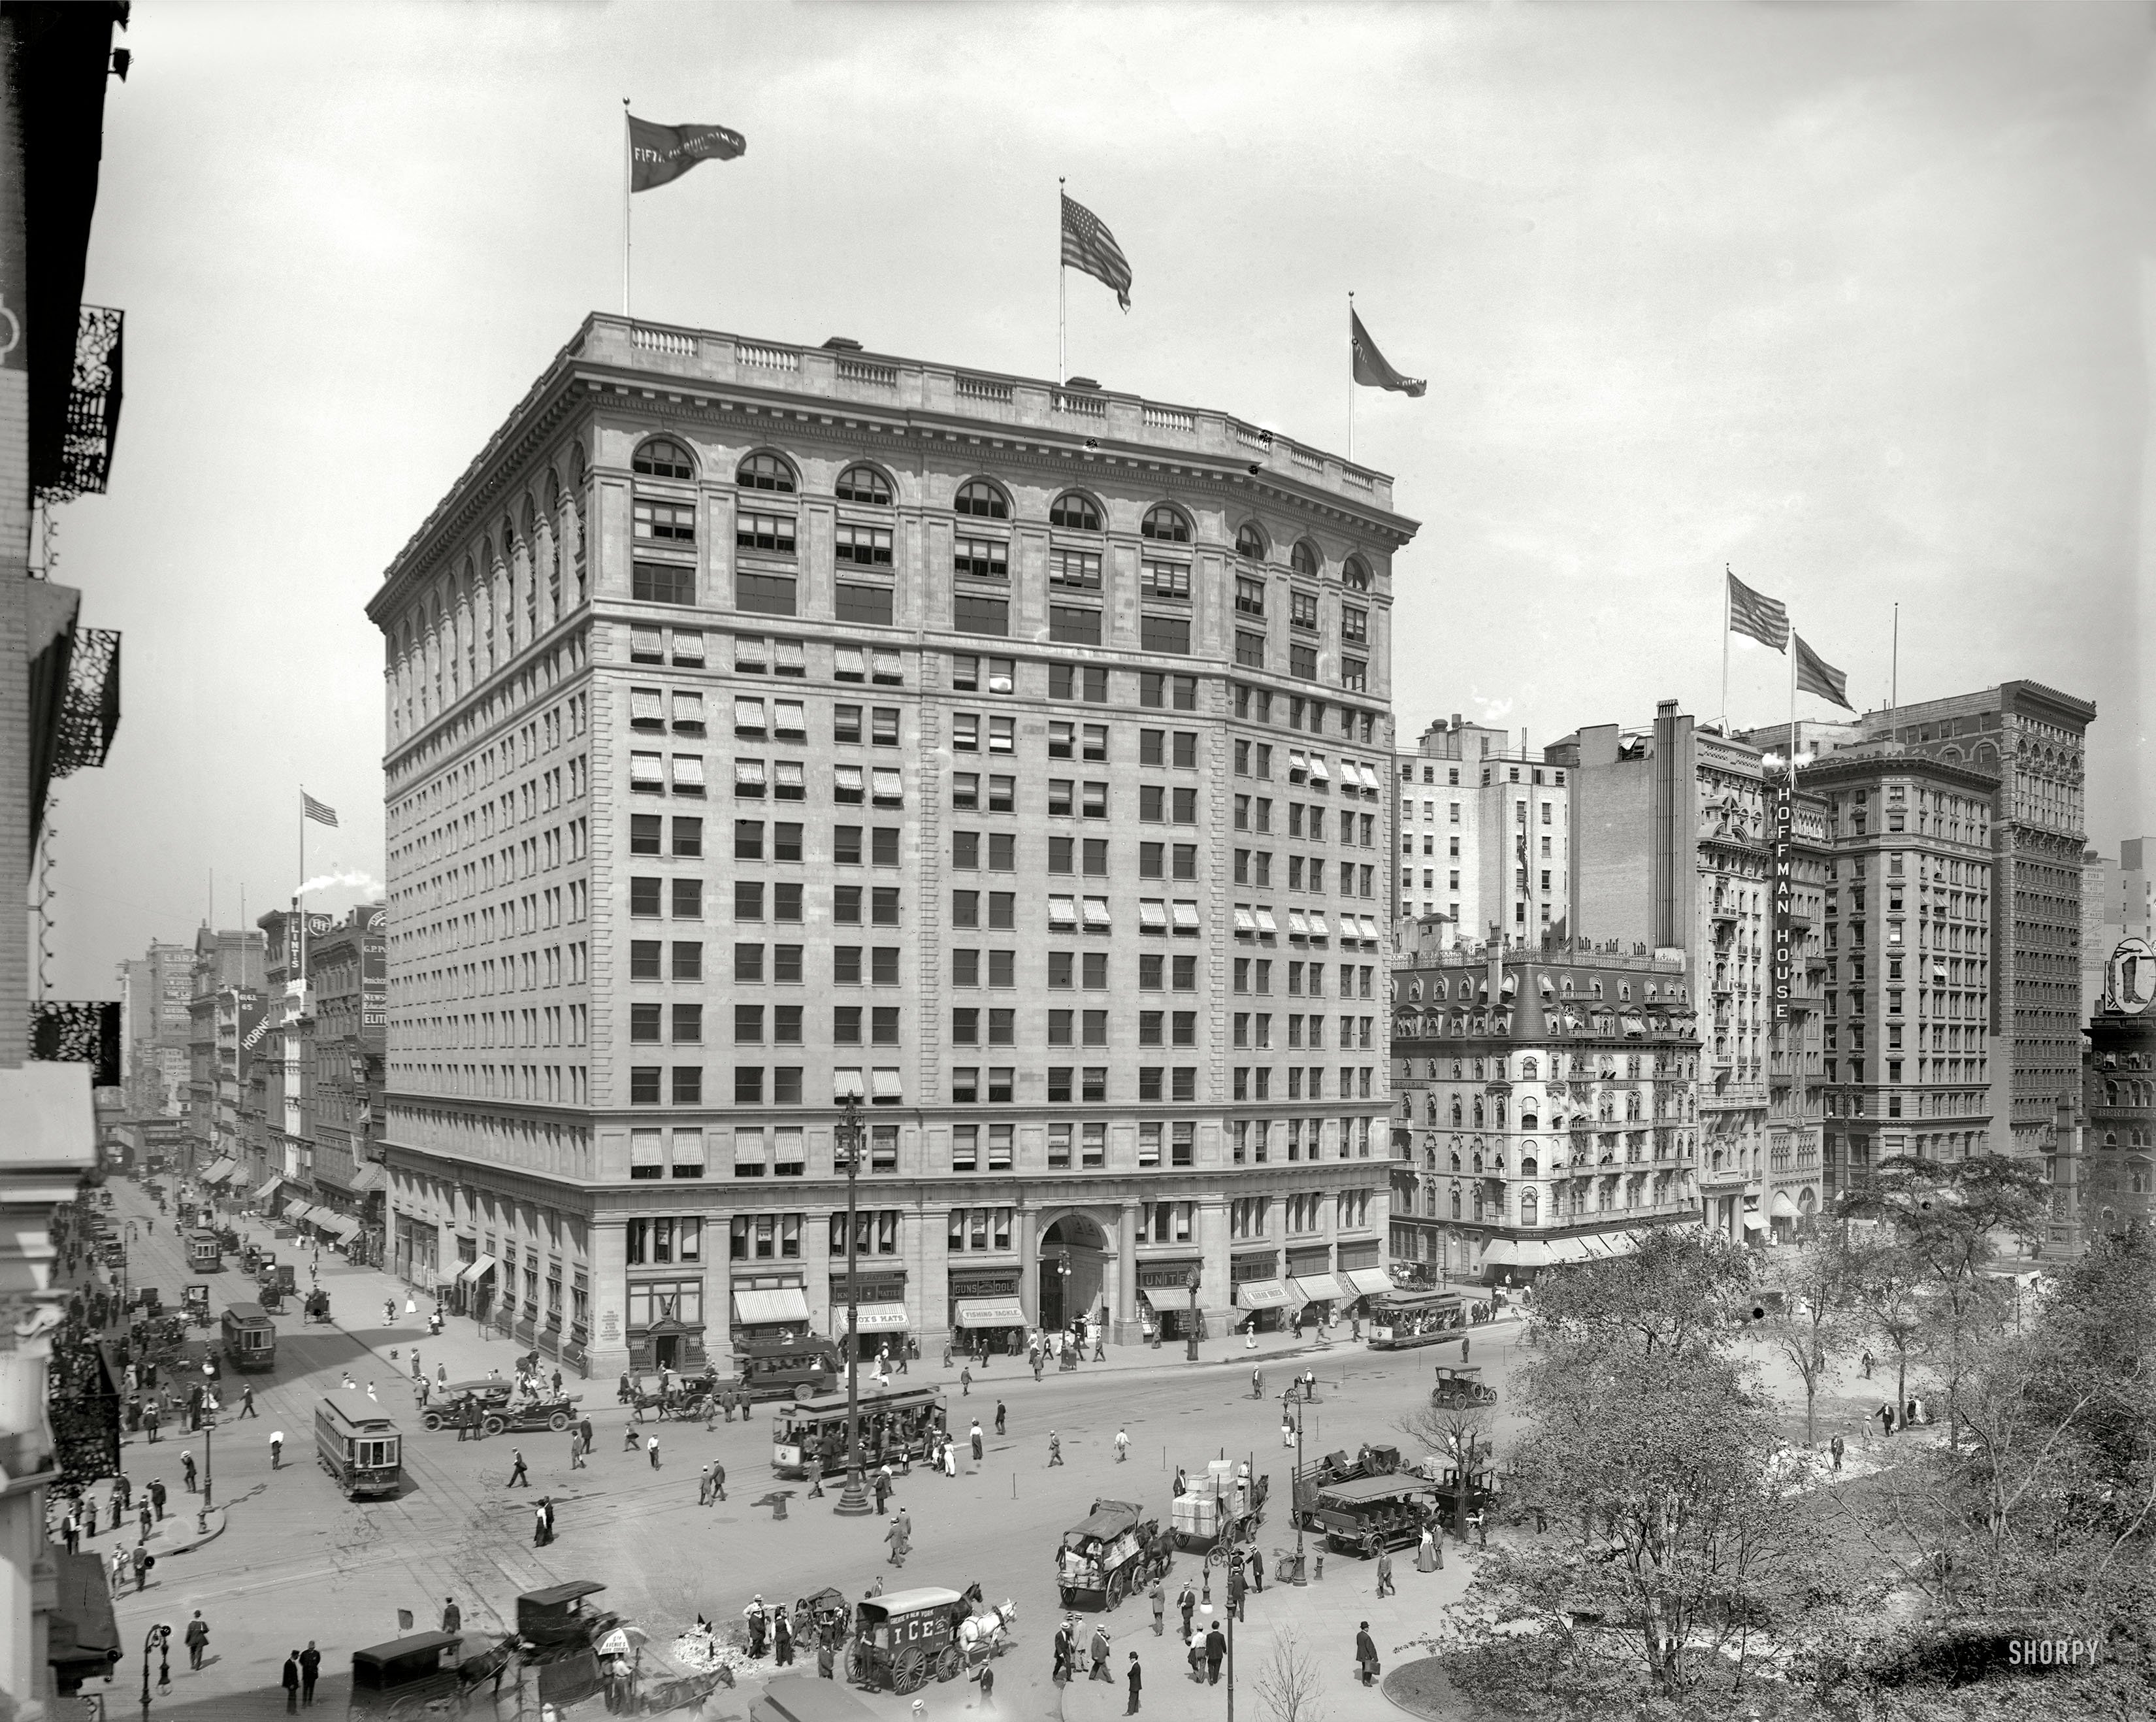 New York circa 1910. "Fifth Avenue Building at Broadway on Madison Square." Along with its celebrated sidewalk clock, the building now anchors the International Toy Center. Detroit Publishing glass negative. View full size.